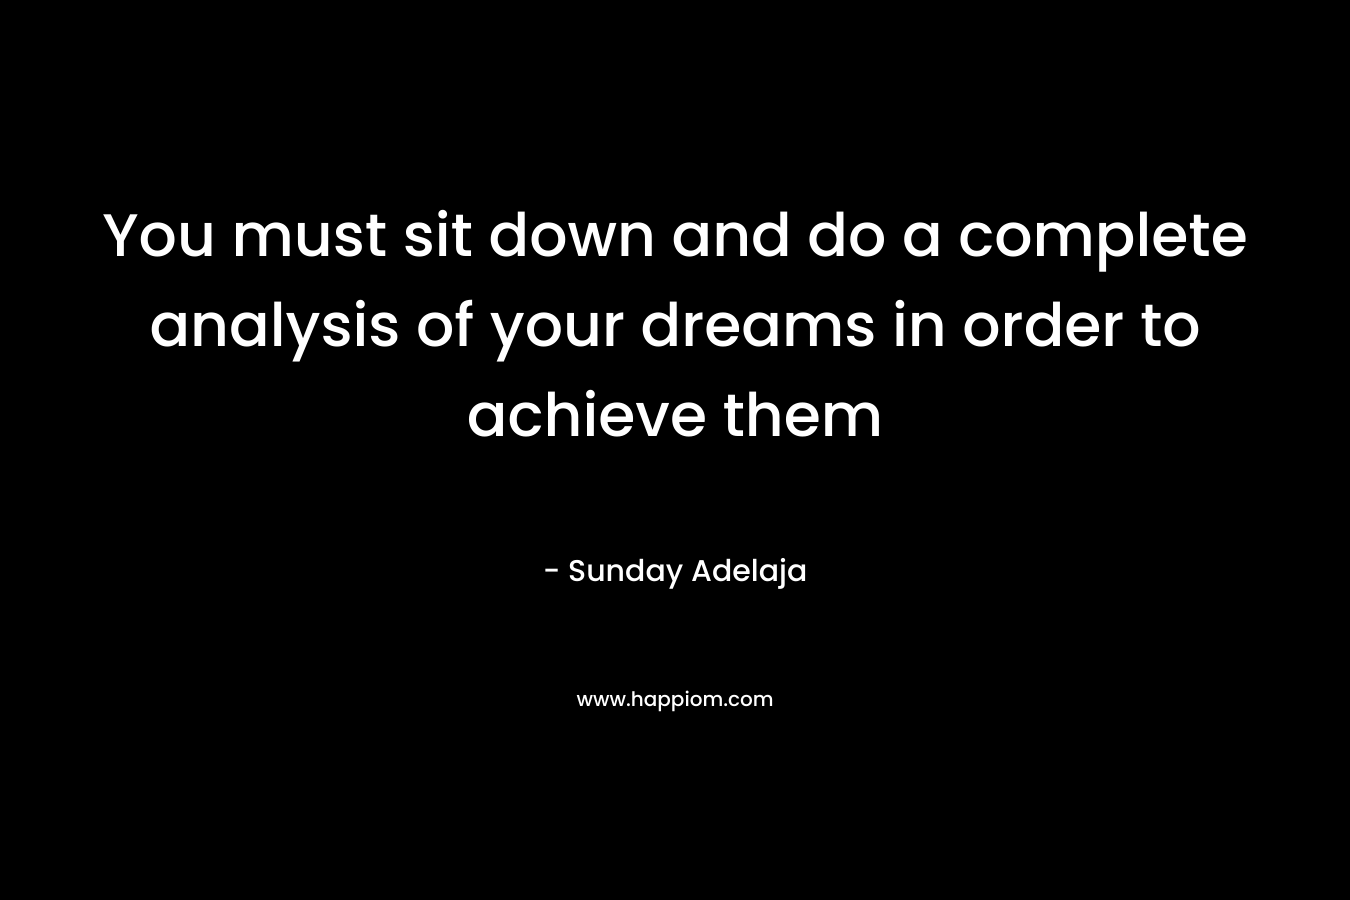 You must sit down and do a complete analysis of your dreams in order to achieve them